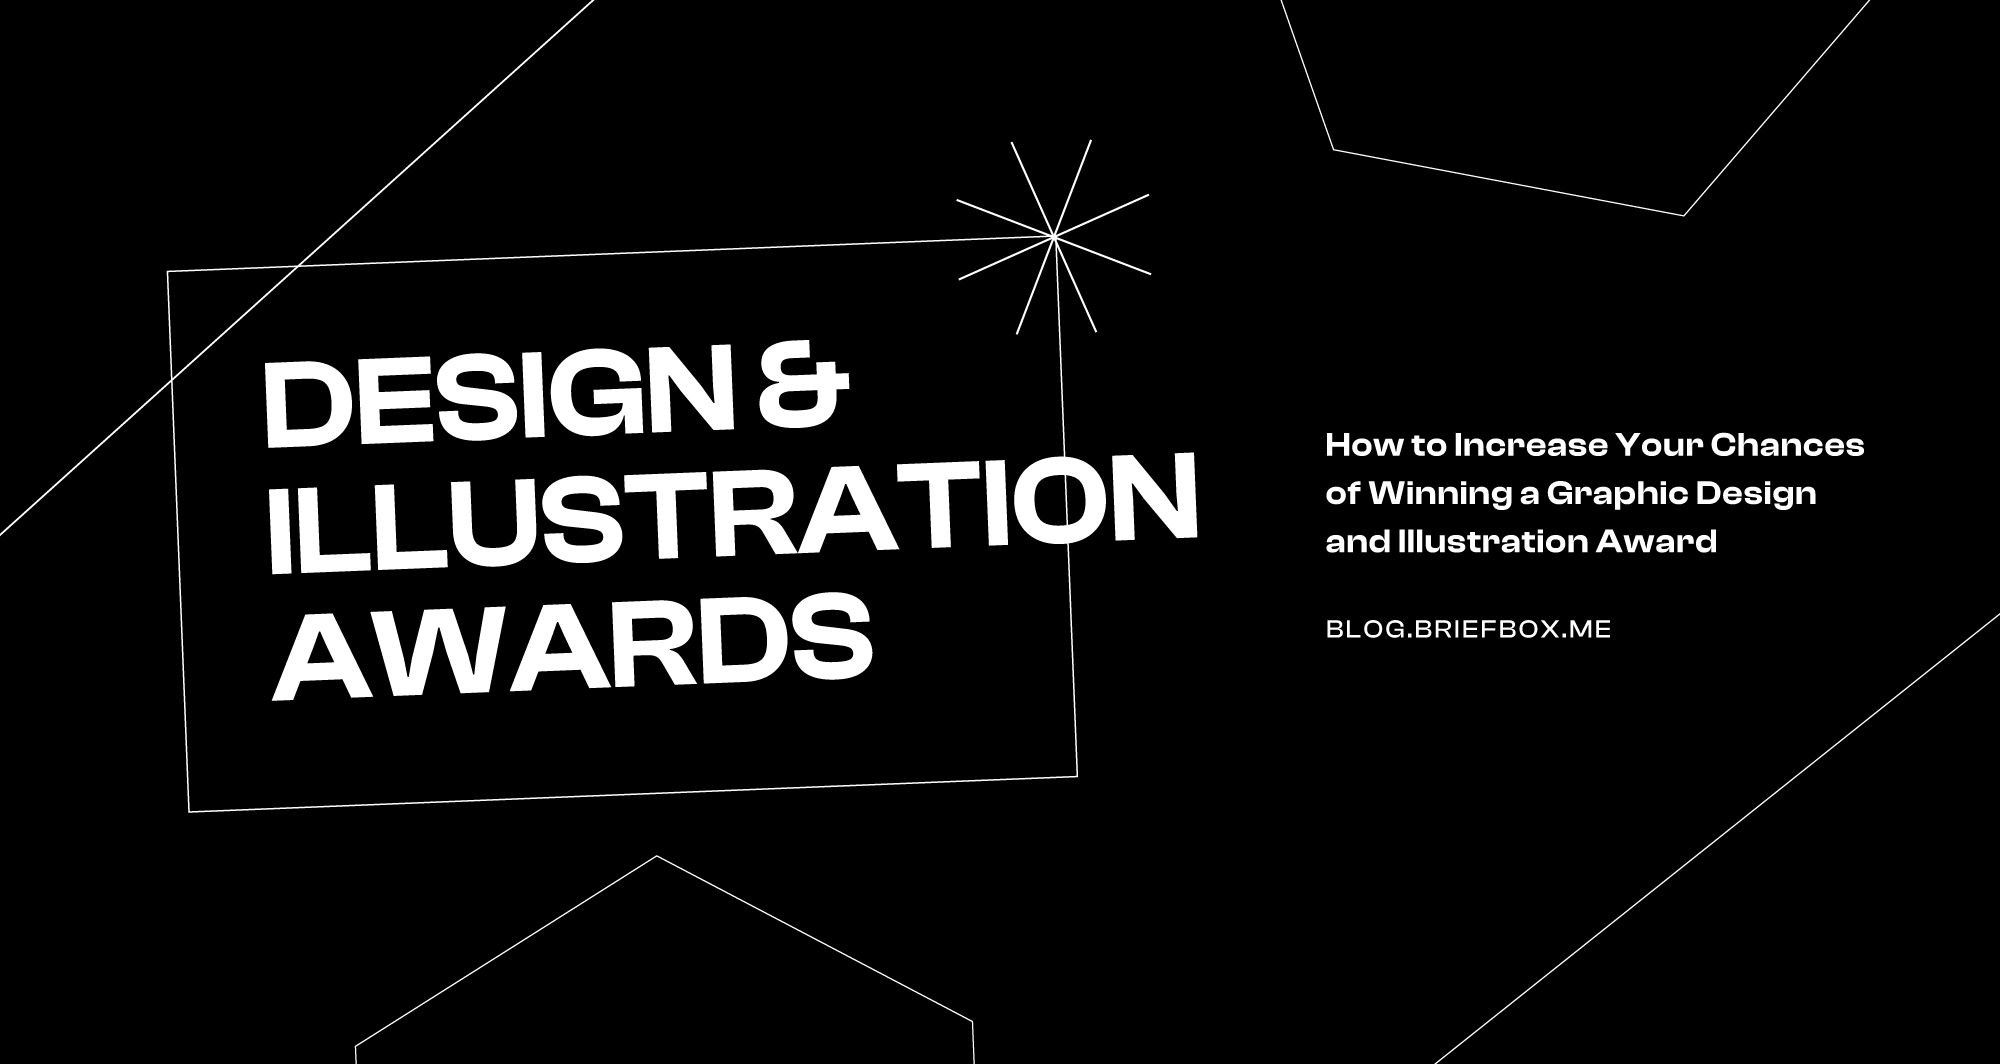 How to Increase Your Chances of Winning a Graphic Design and Illustration Award